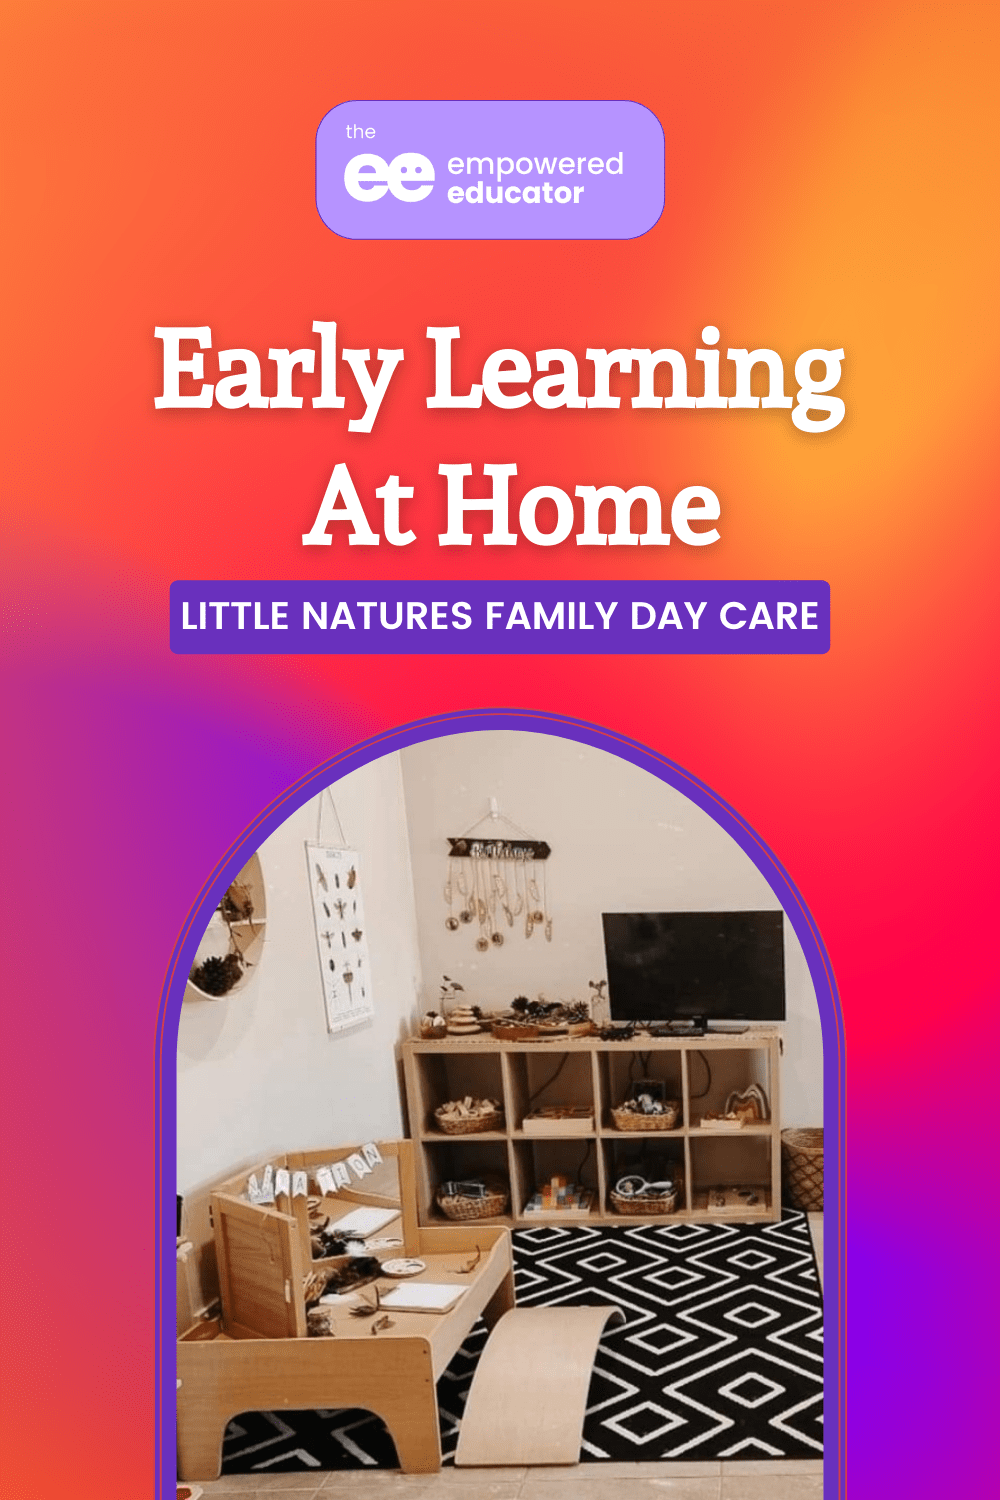 early learning at home - empowered educator feature